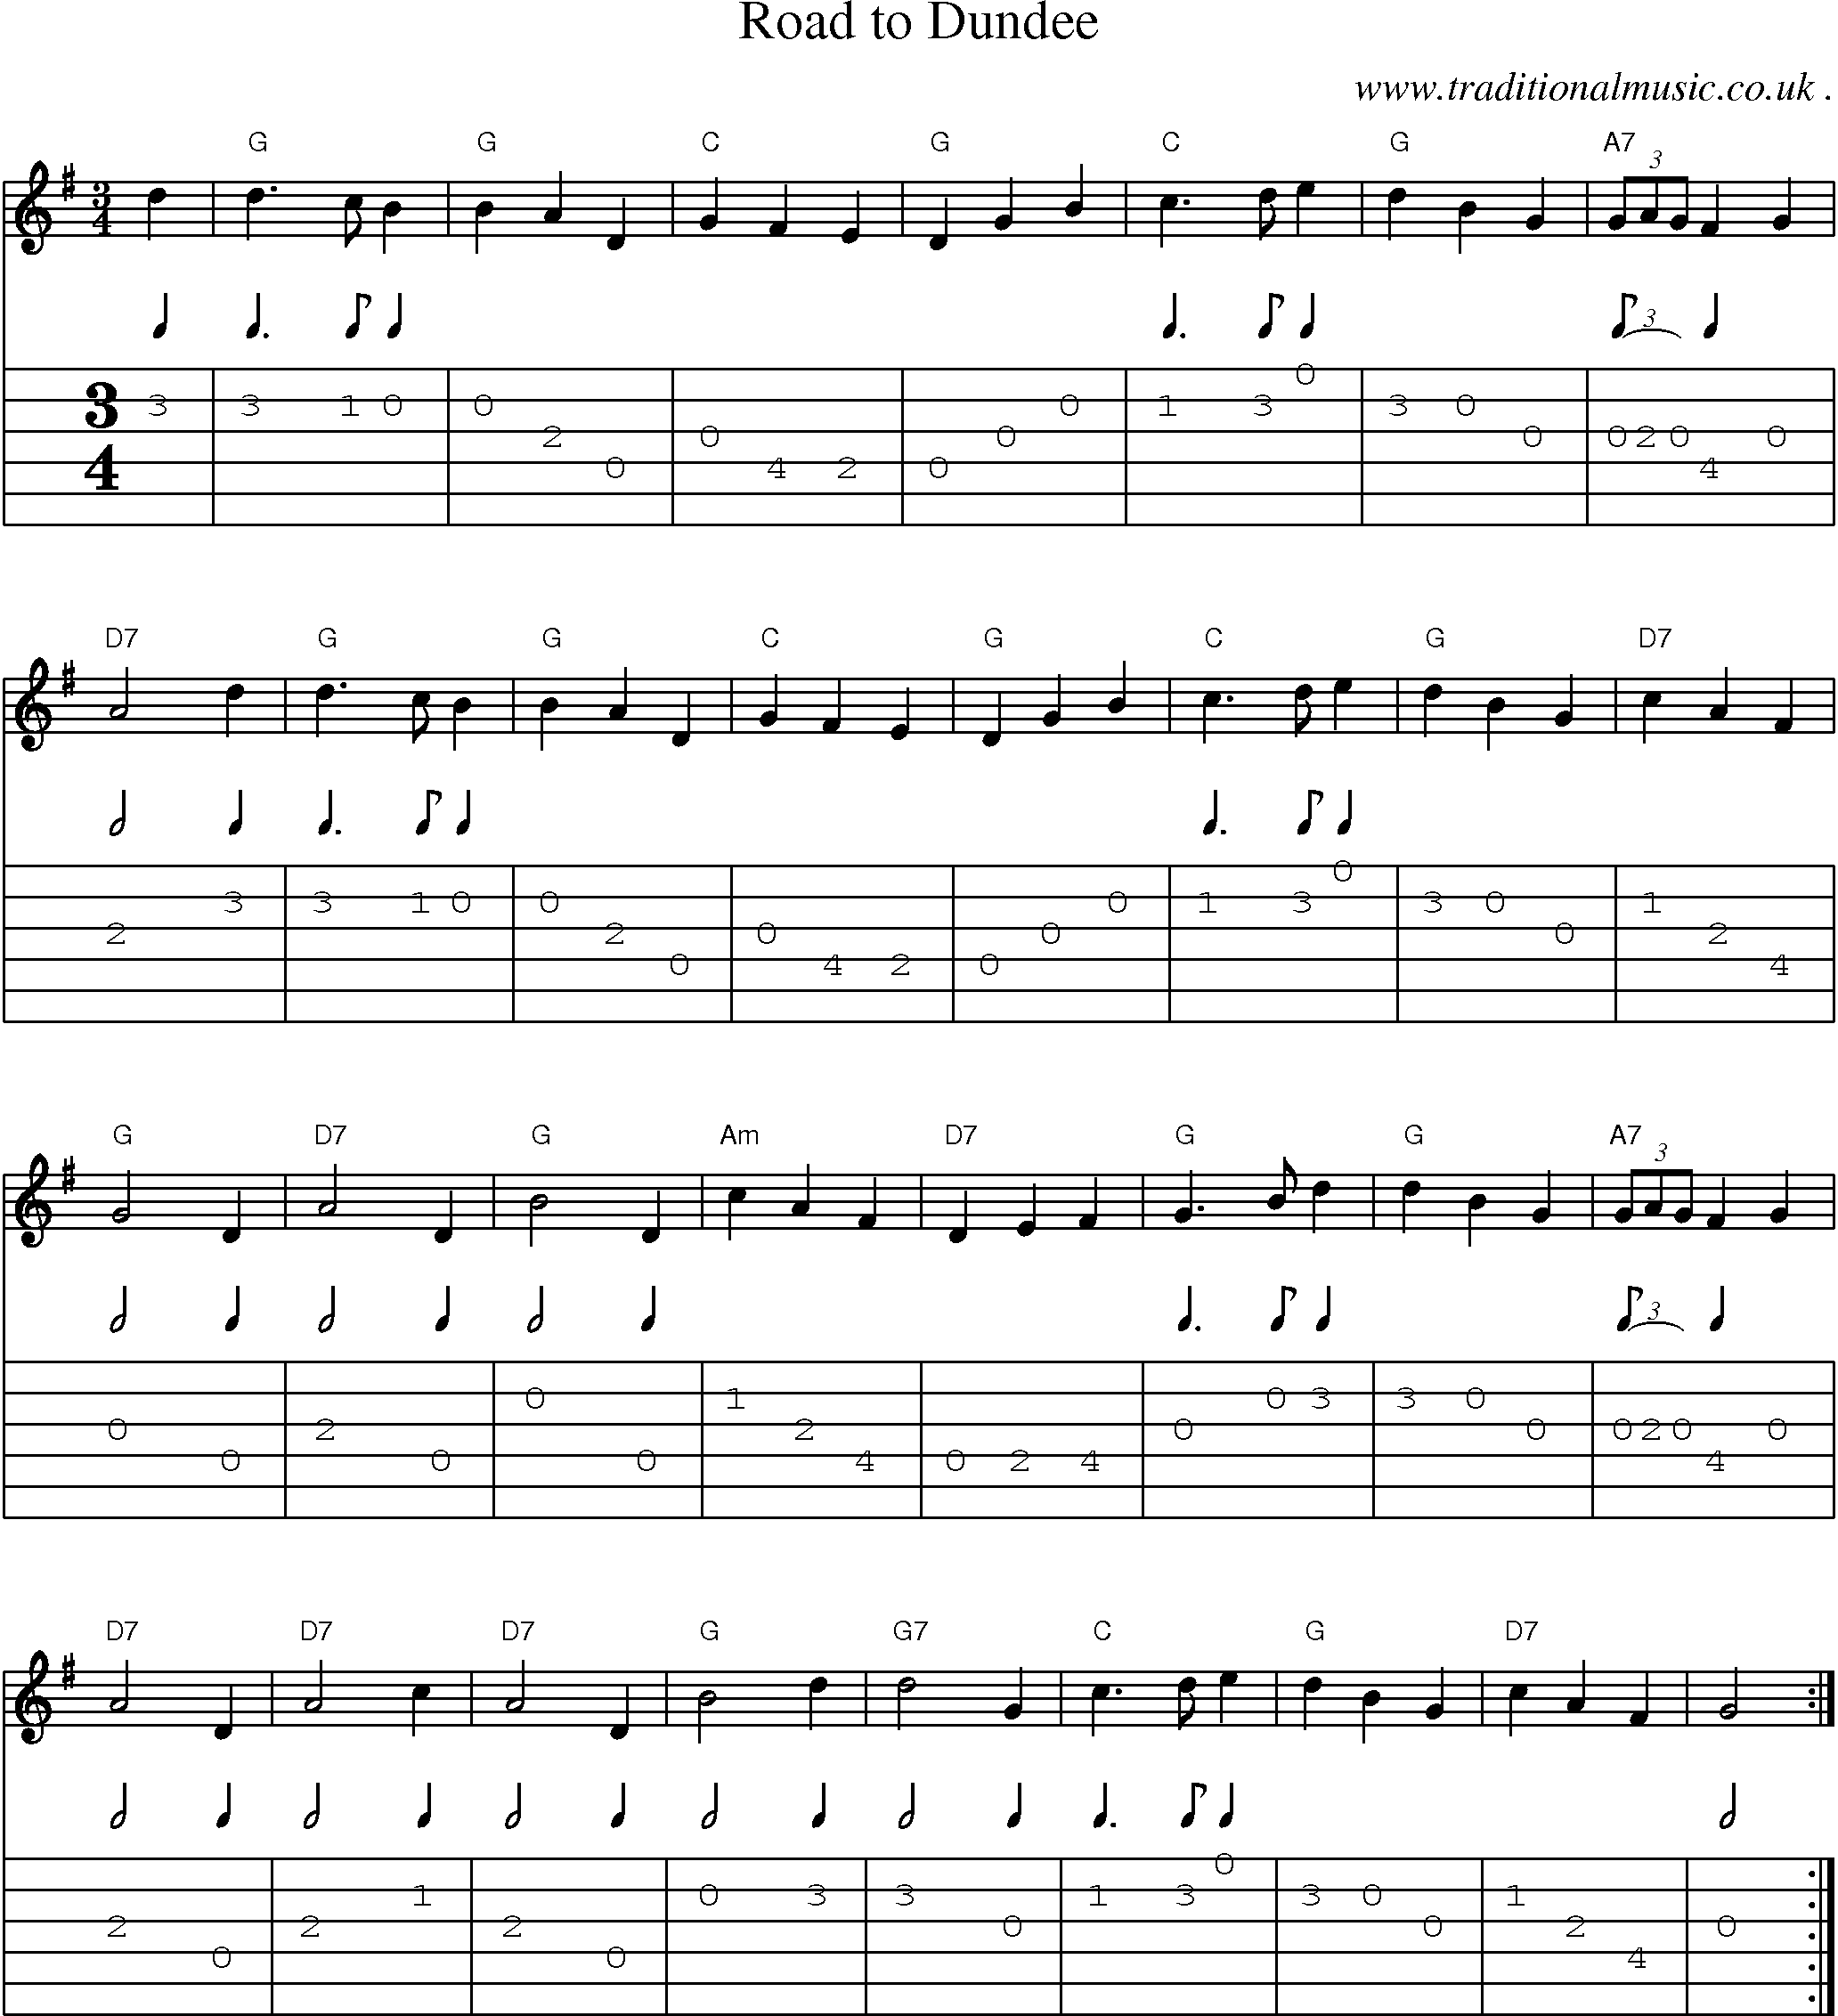 Sheet-Music and Guitar Tabs for Road To Dundee